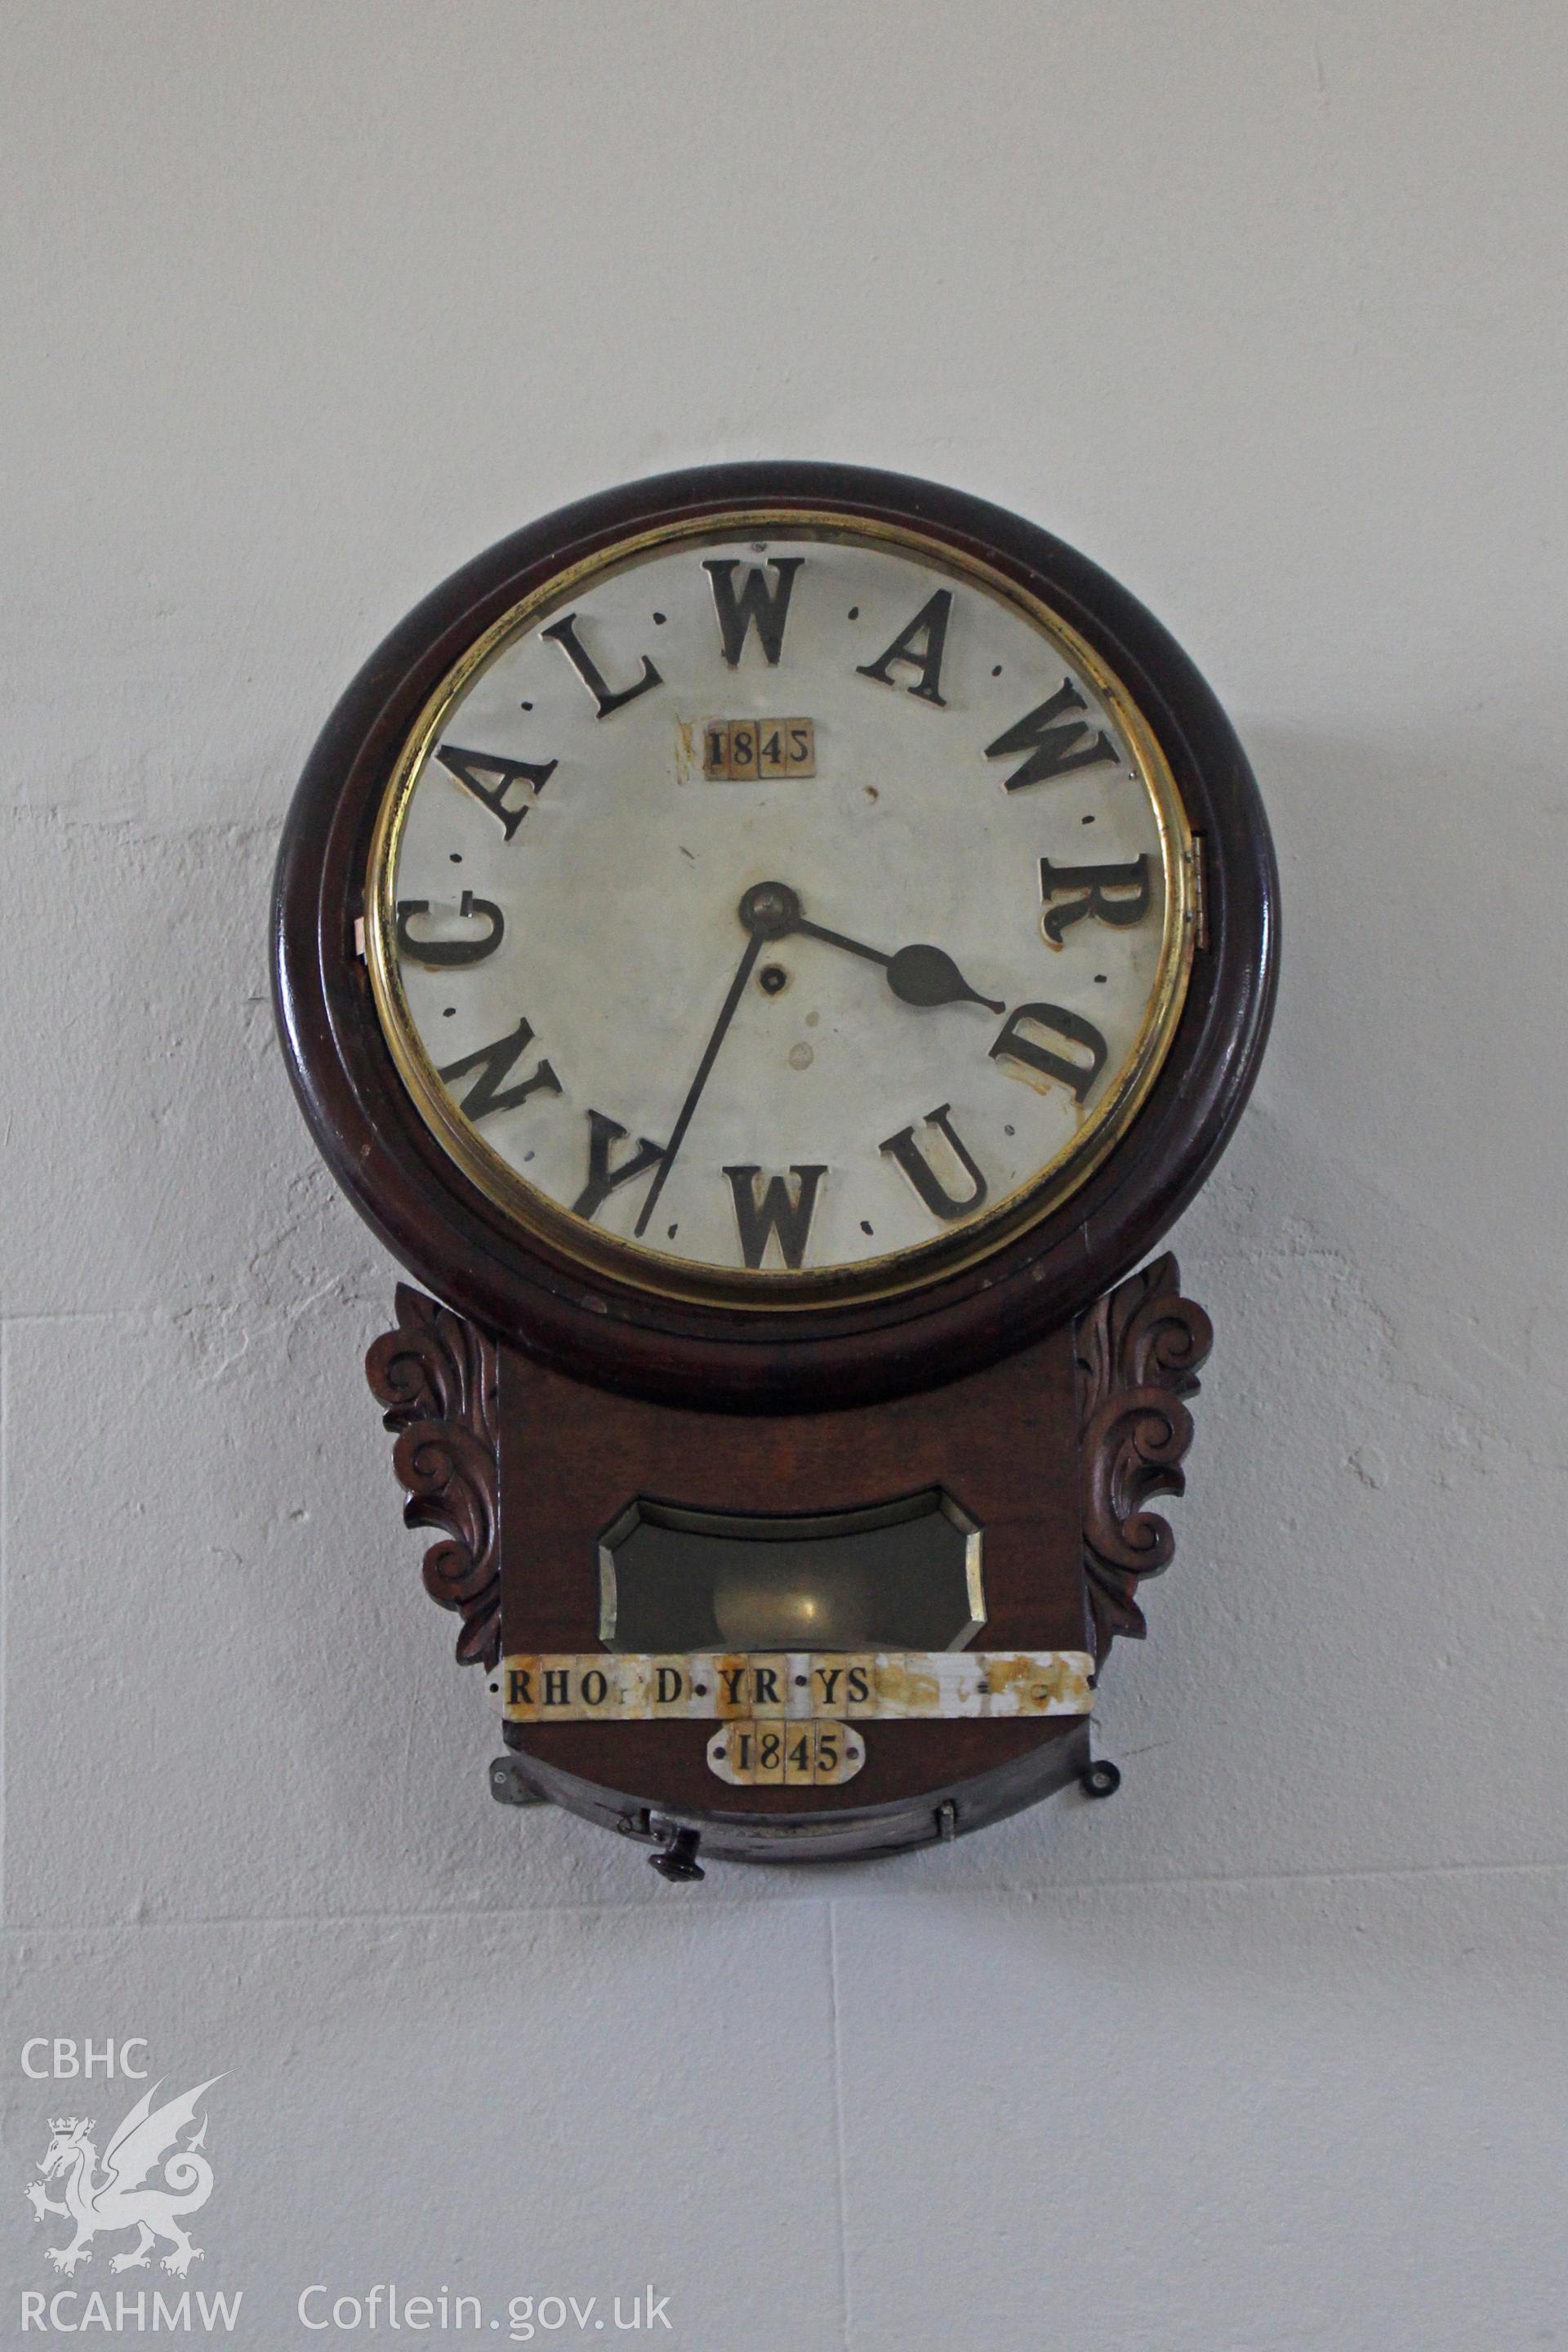 Clock in the chapel vestry. Photographic survey of Seion Welsh Baptist Chapel, Morriston, conducted by Sue Fielding on 13th May 2017.